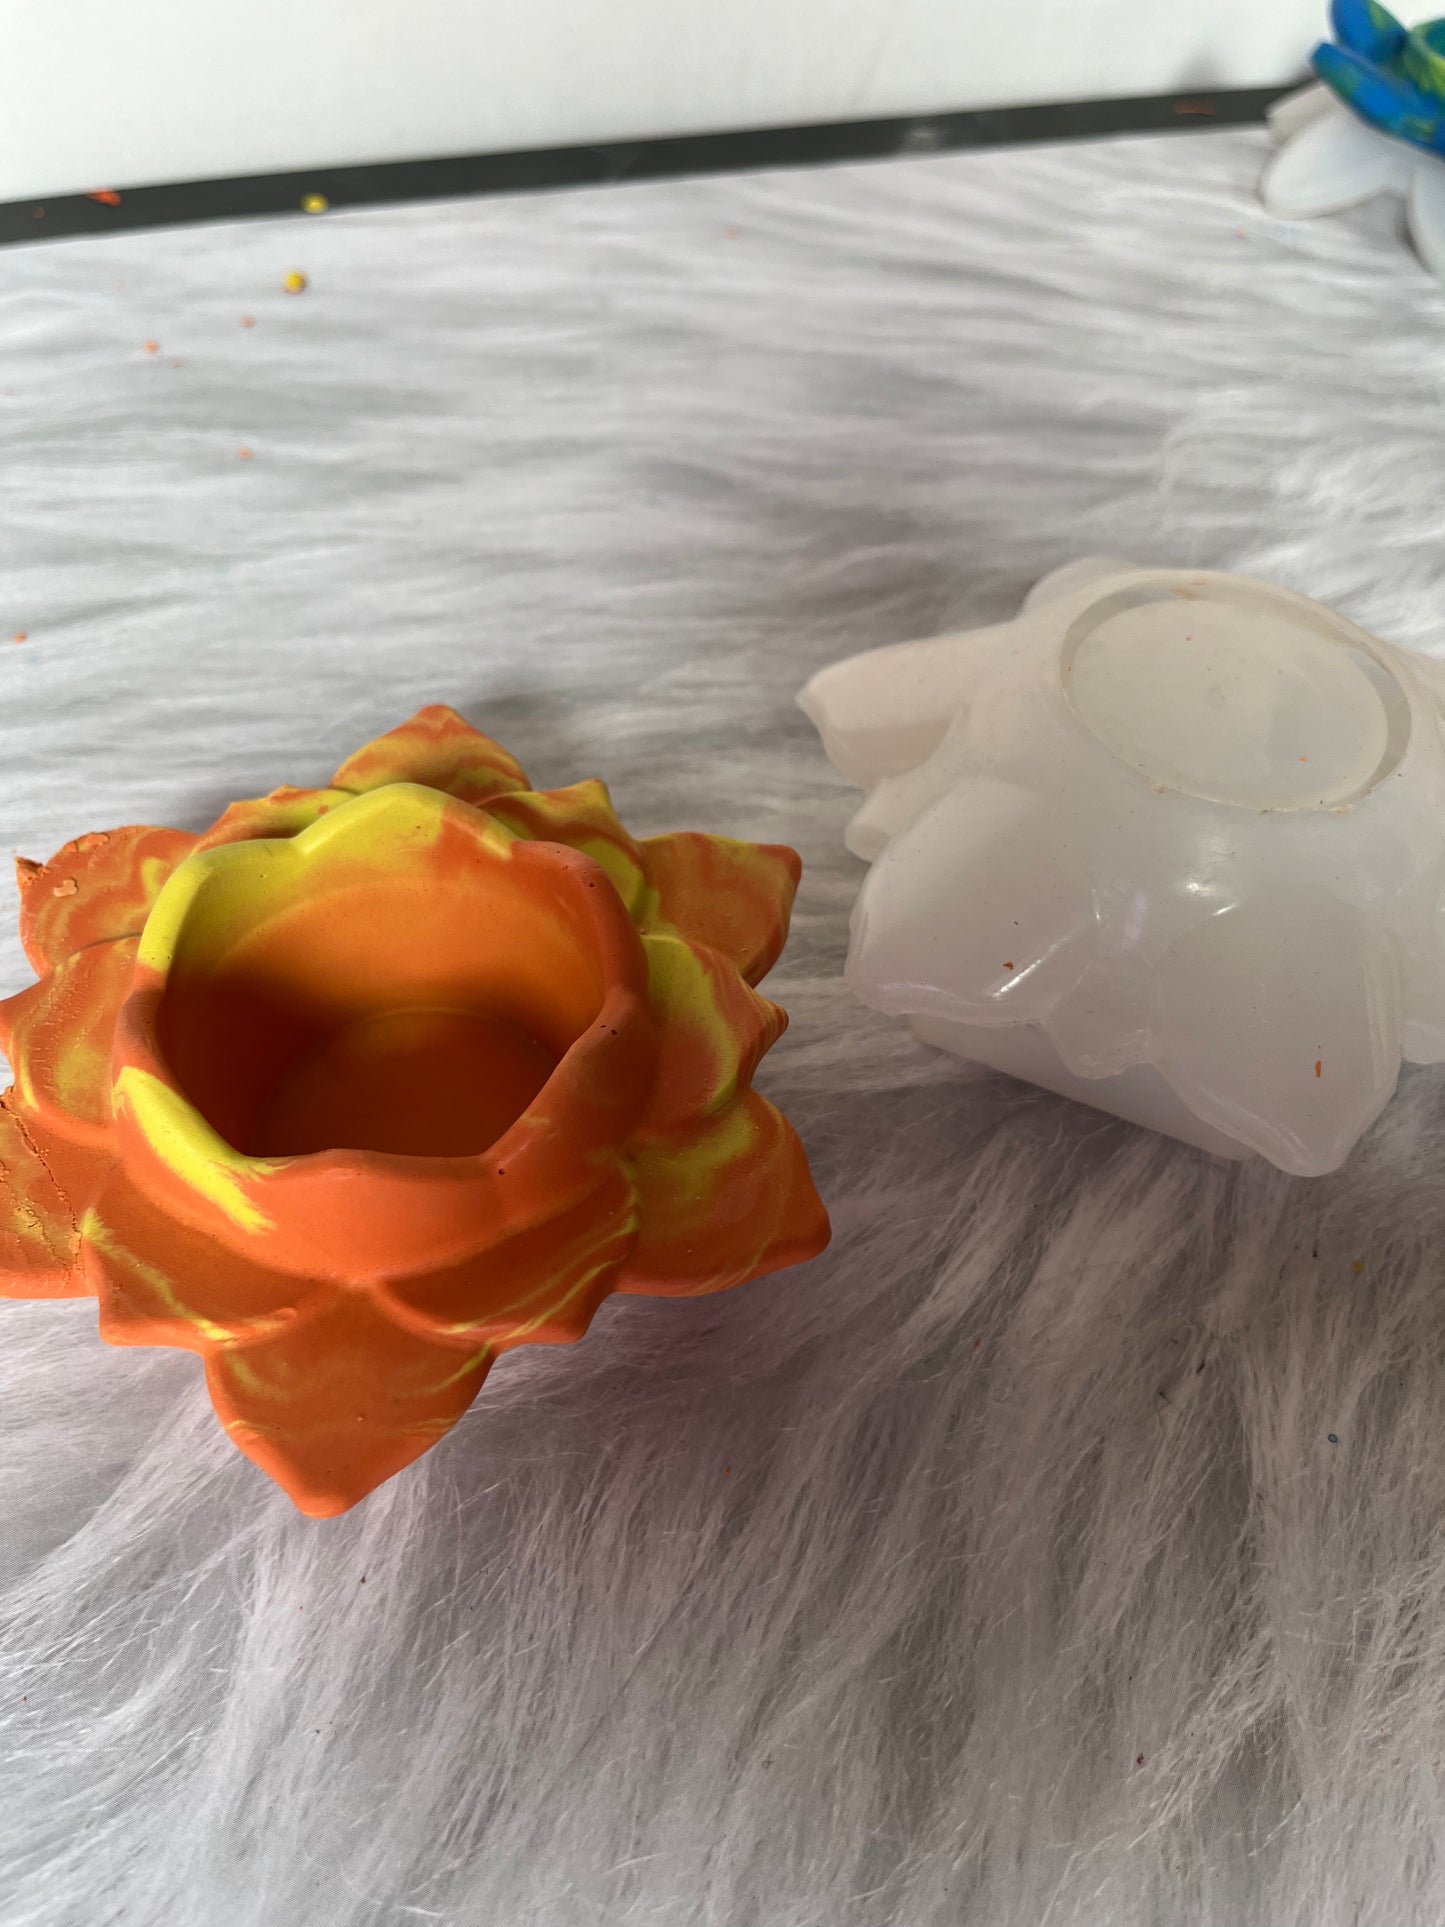 Lotus Tea Light/ Candle Stand Silicone Mould for Beyond MIX & Resin